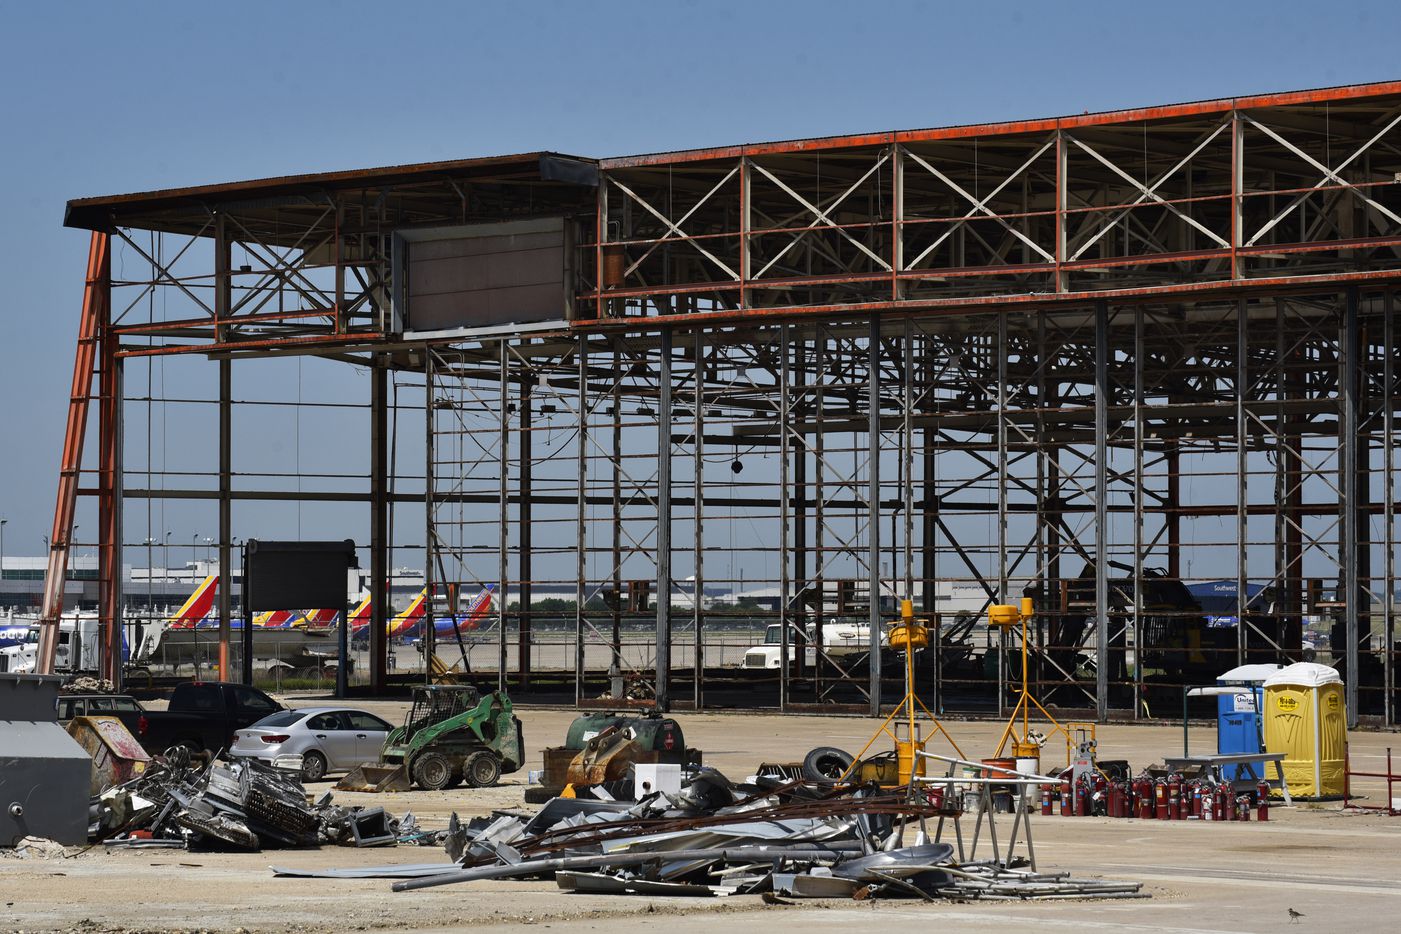 The old Braniff hangars at Dallas Love Field are being renovated just across the runway from...